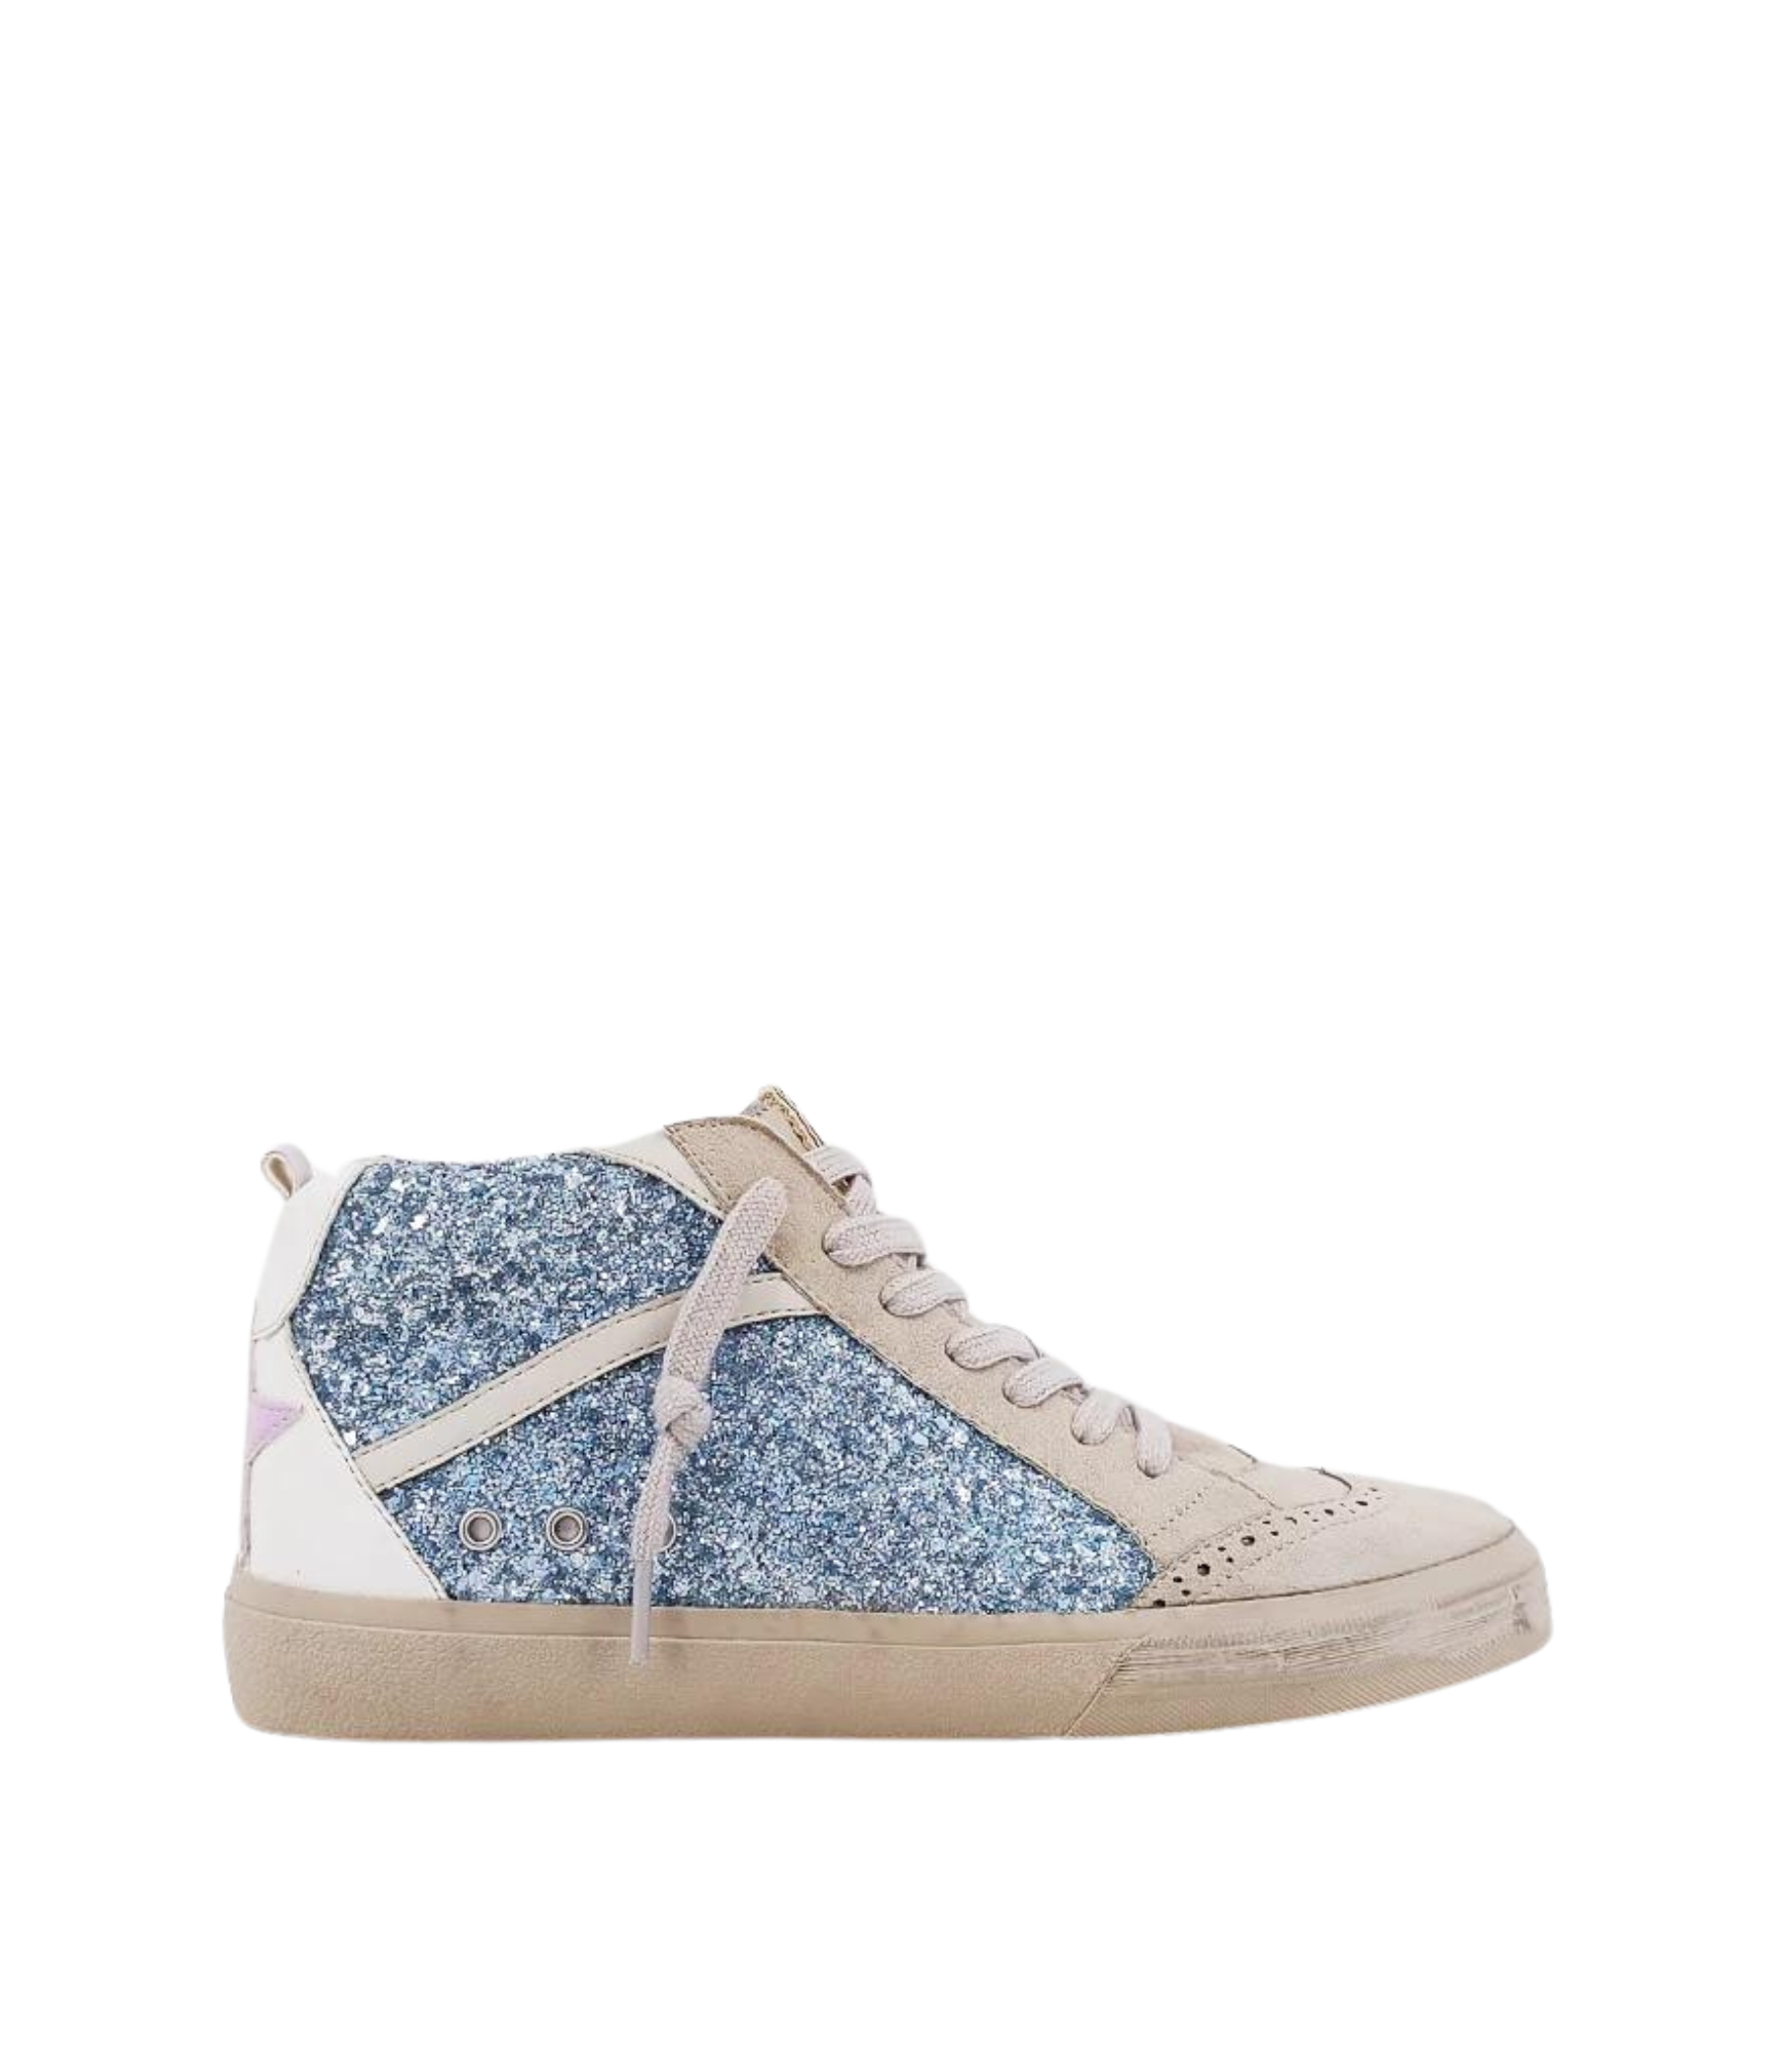 Riley Blue Glitter Sneaker with Lilac Stars